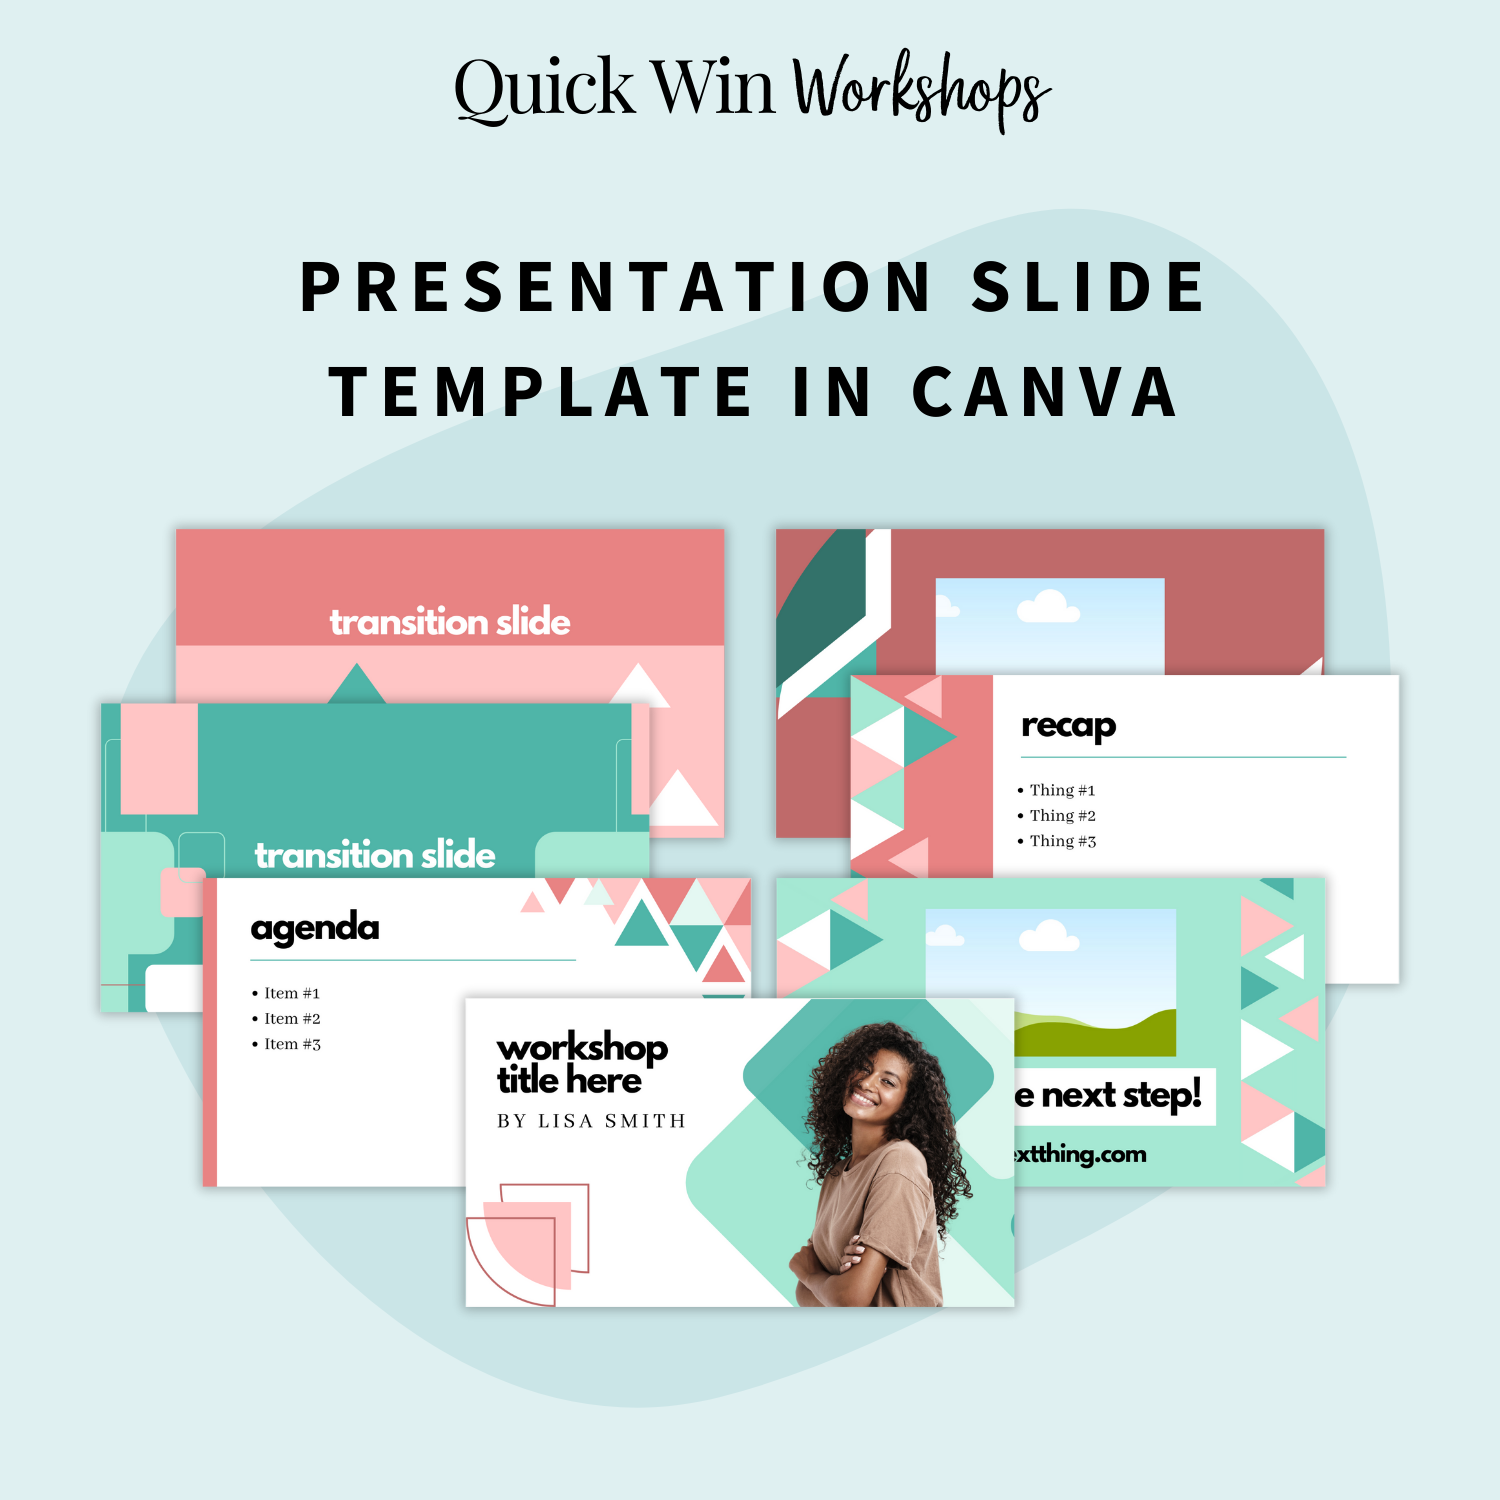 Quick Win Workshops that Boost Your Bottom Line: Presentation Slide Template in Canva